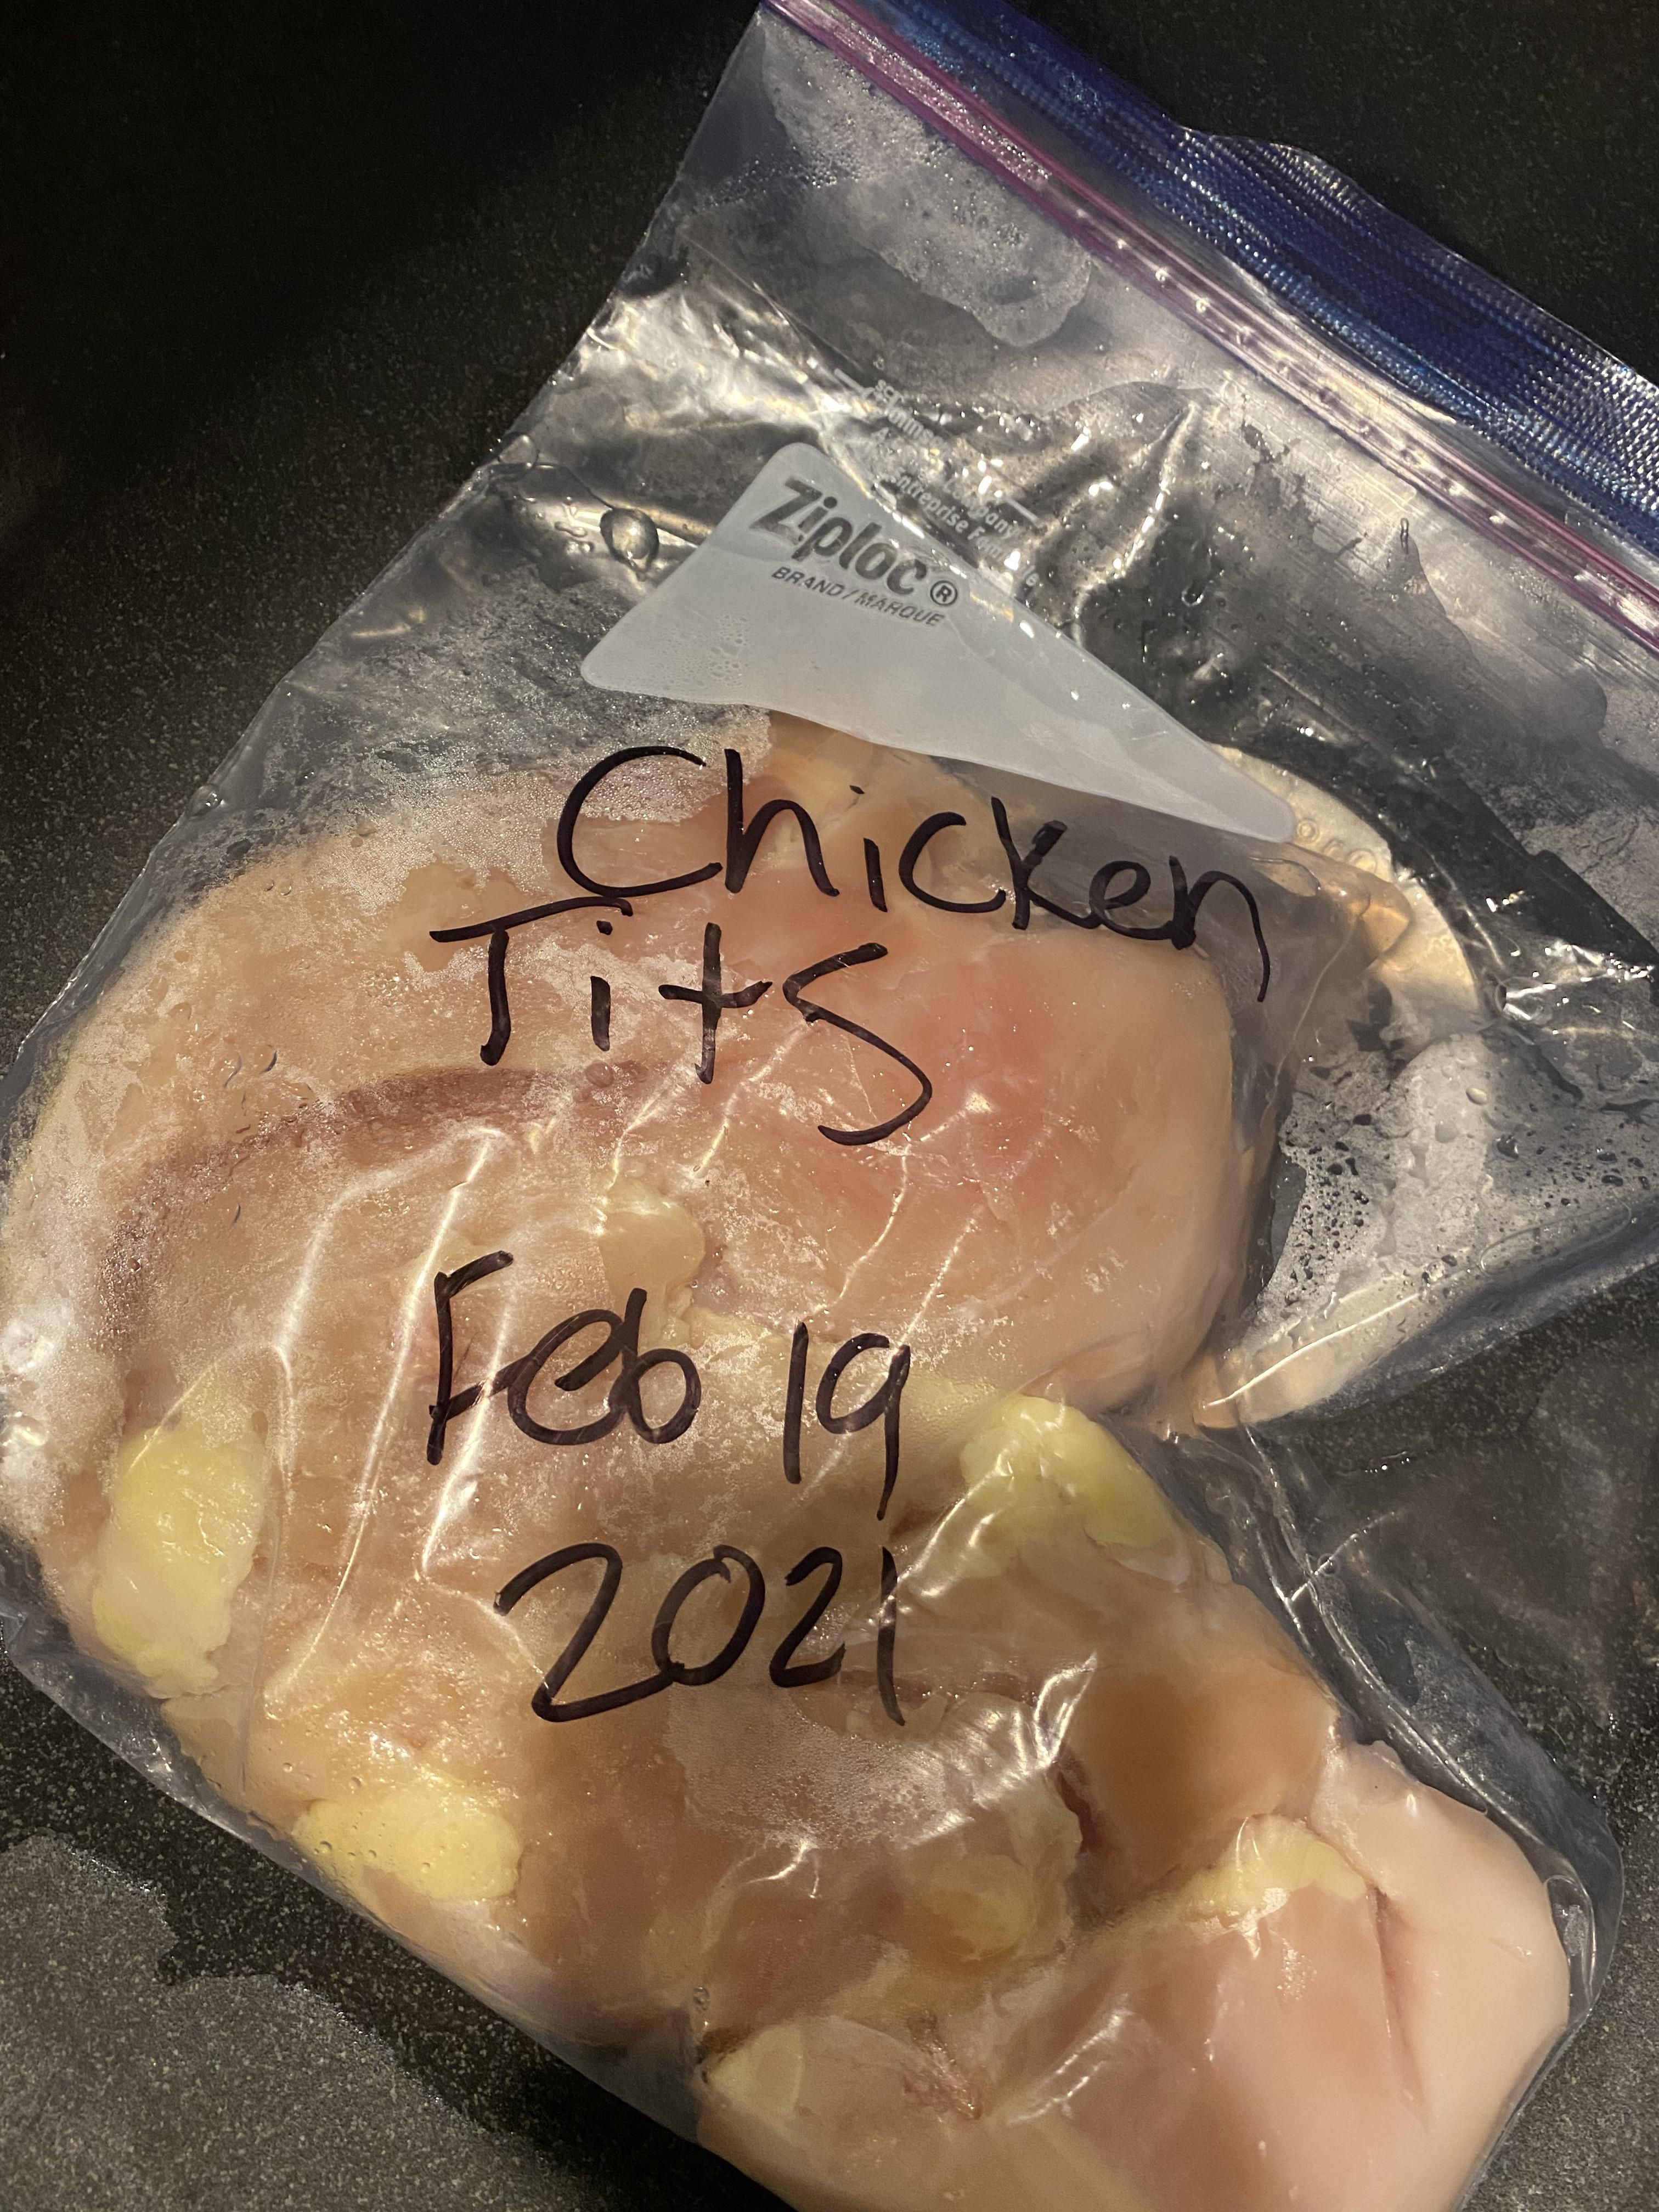 My husband labeled our frozen meats after our last store trip. I got a good laugh pulling this out for dinner.